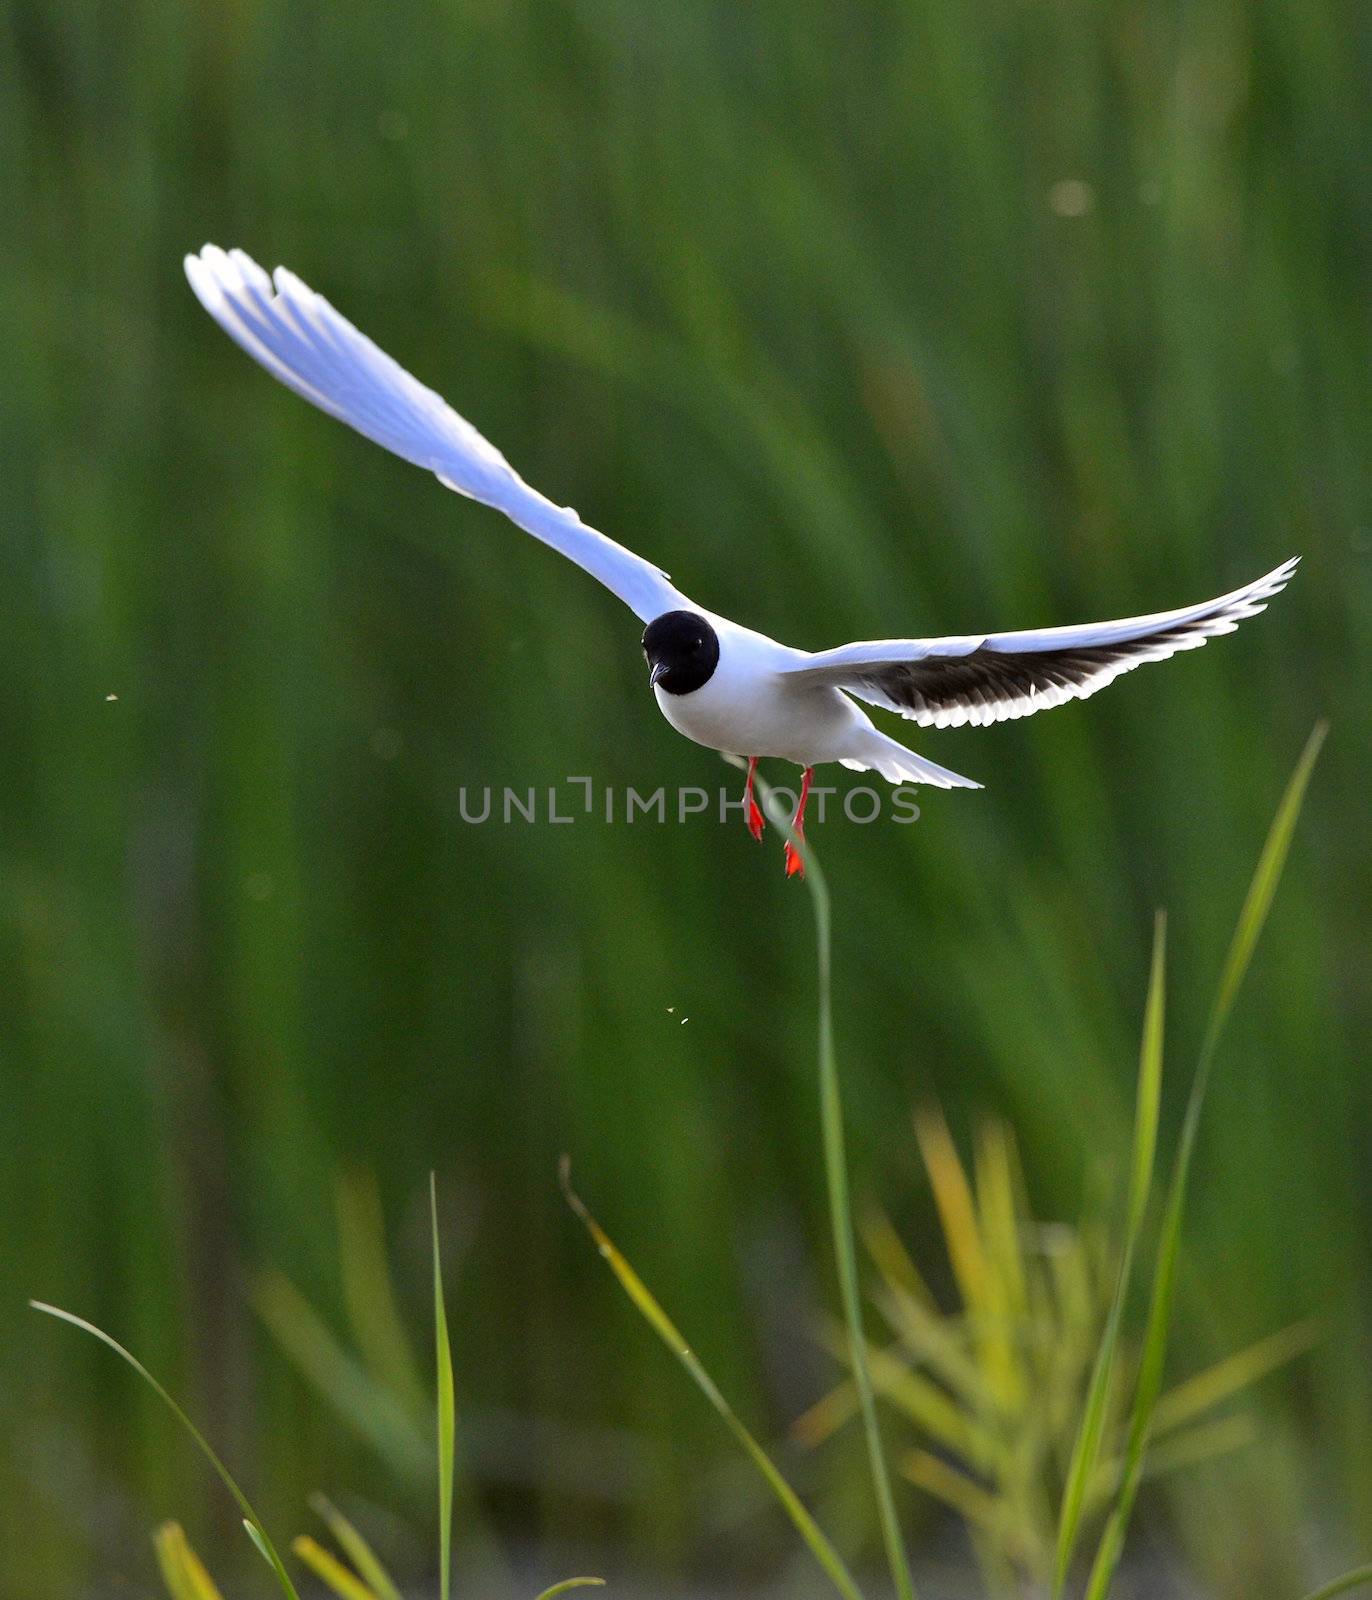 Black-headed Gull (Larus ridibundus) in flight on the green grass background. Front Black-headed Gull (Larus ridibundus) in flight on the green grass background. Front